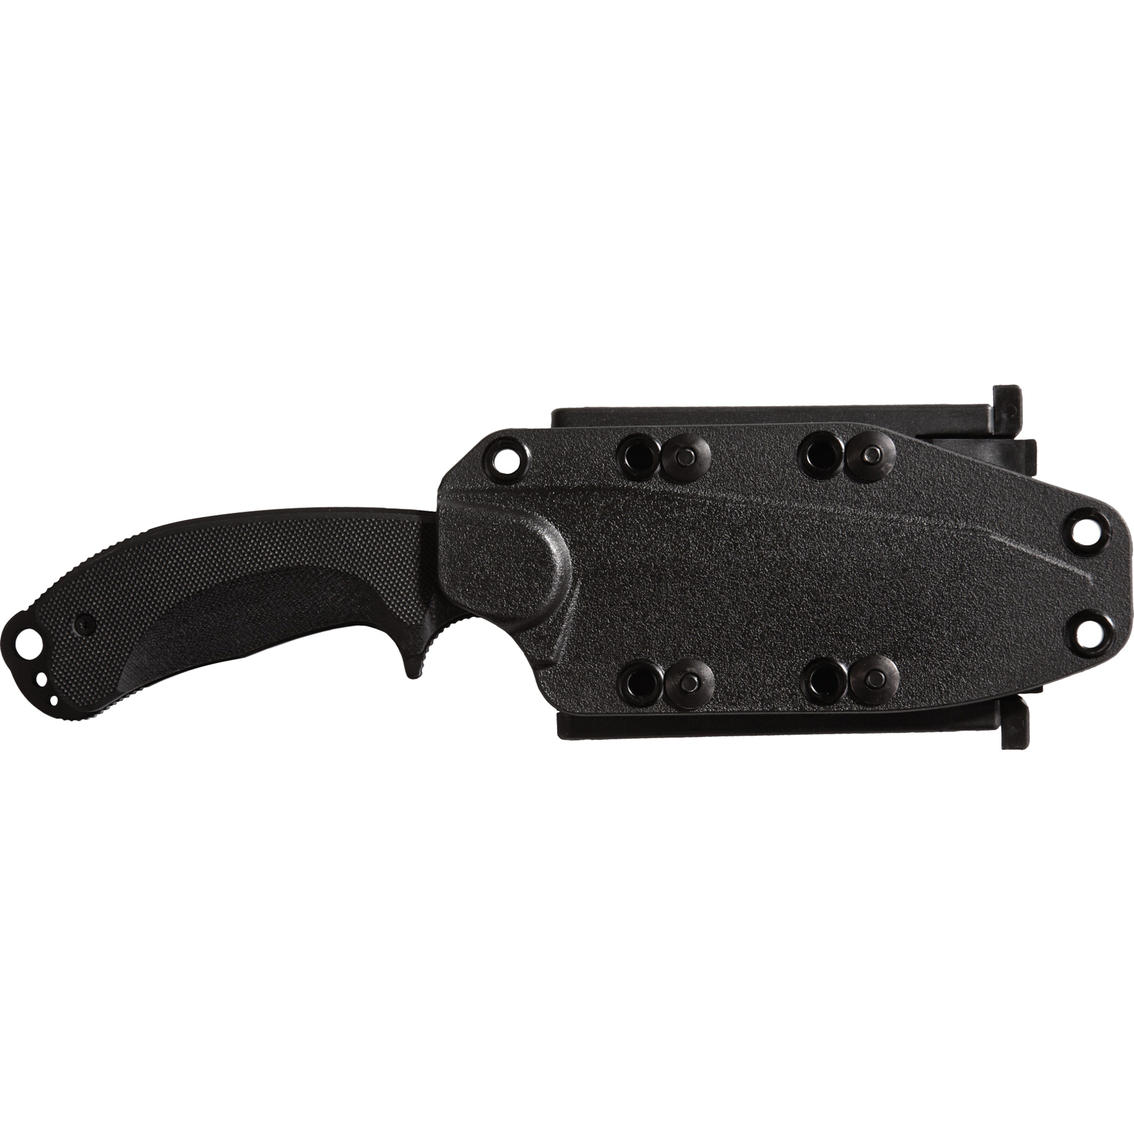 5.11 Tactical Tanto Surge Fixed Blade Knife - Image 3 of 4